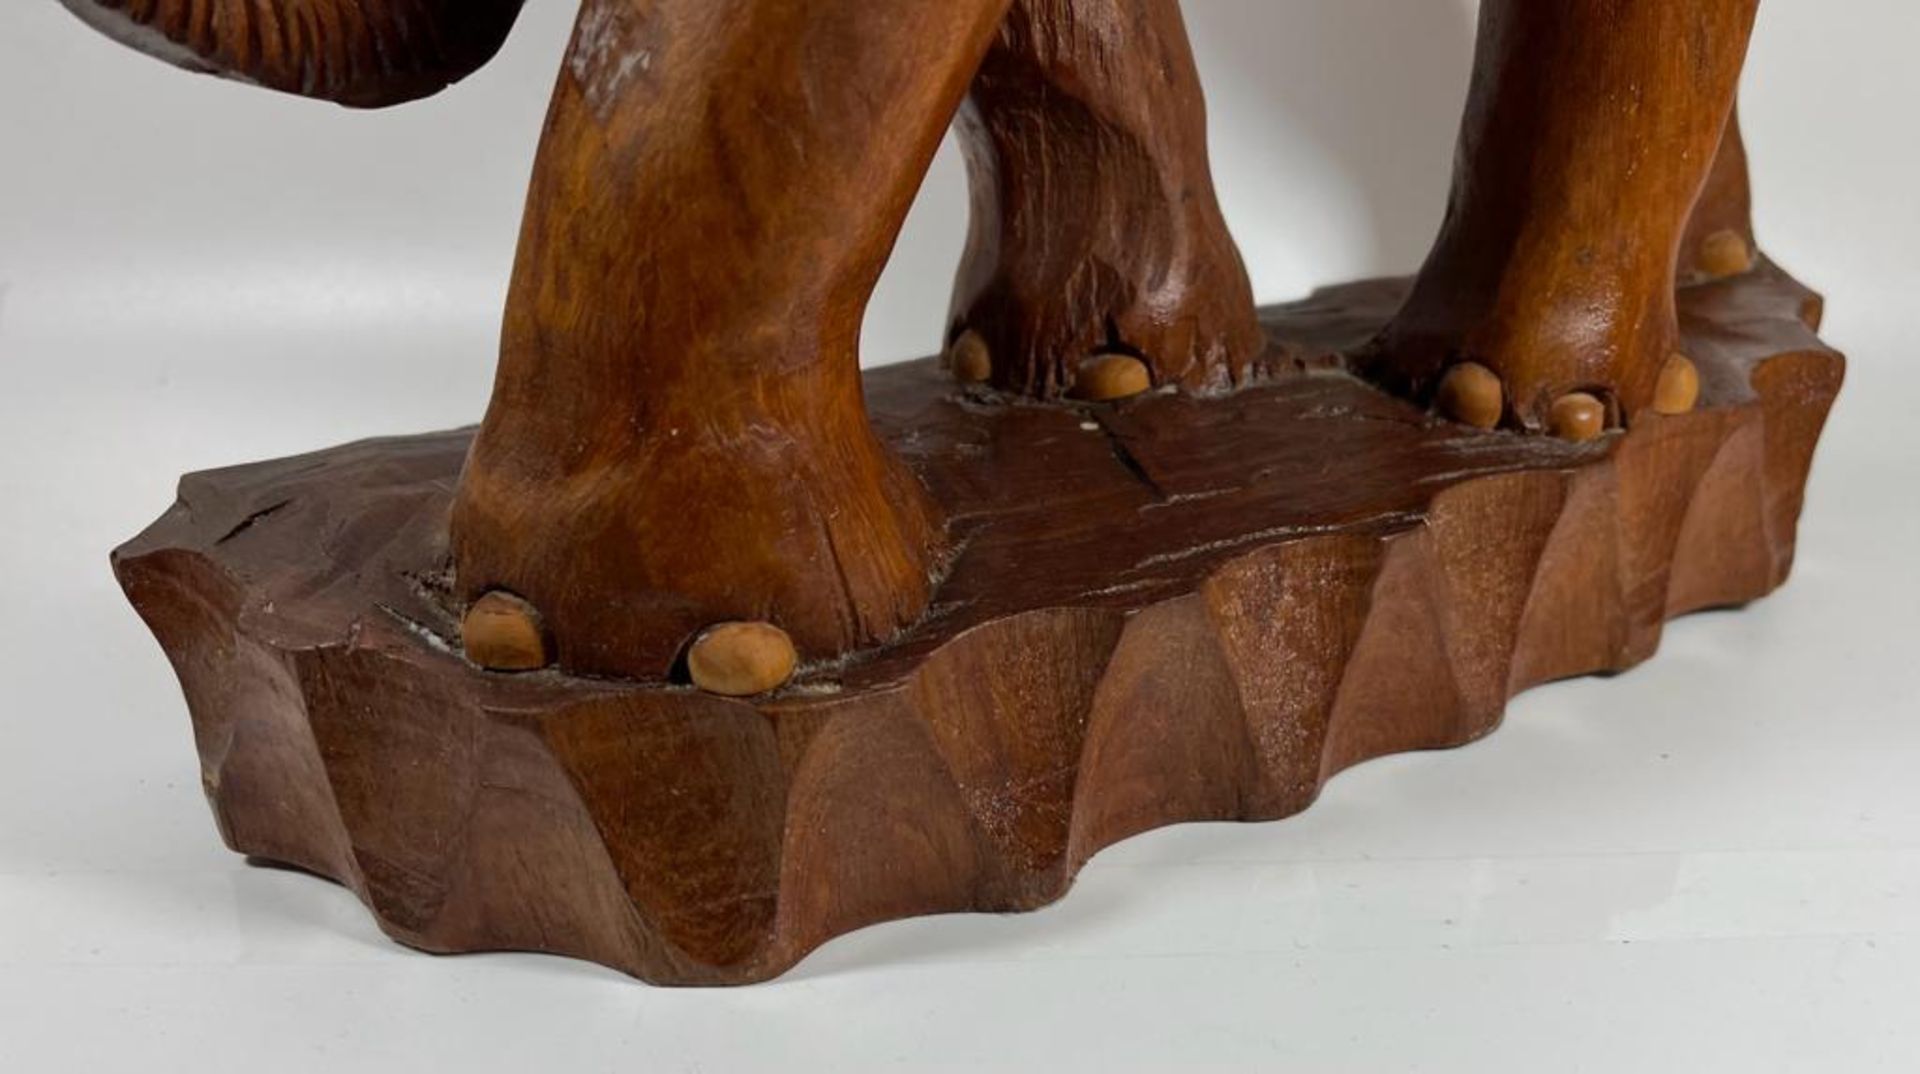 A LARGE AND HEAVY VINTAGE CARVED SOLID TEAK ELEPHANT MODEL, LIKELY CARVED FROM ONE PIECE OF TEAK - Image 9 of 10